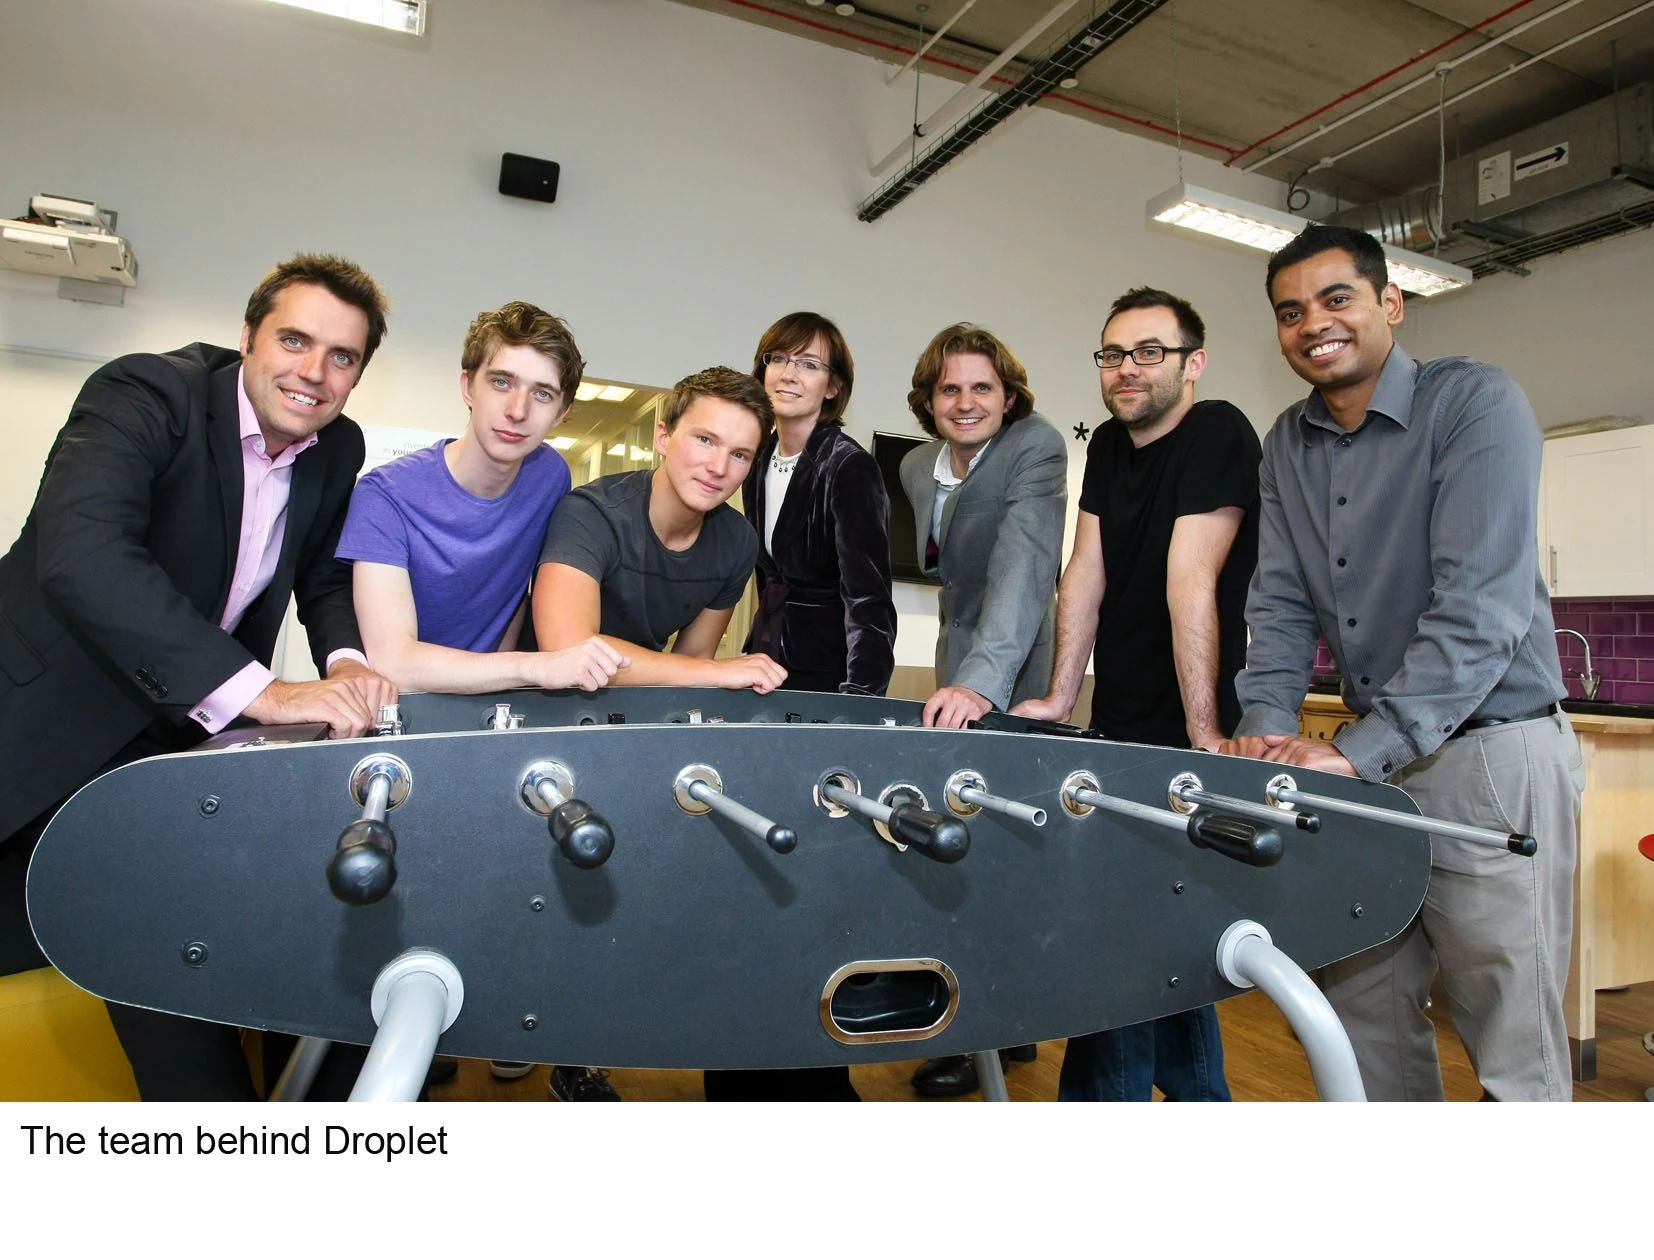 The Droplet team